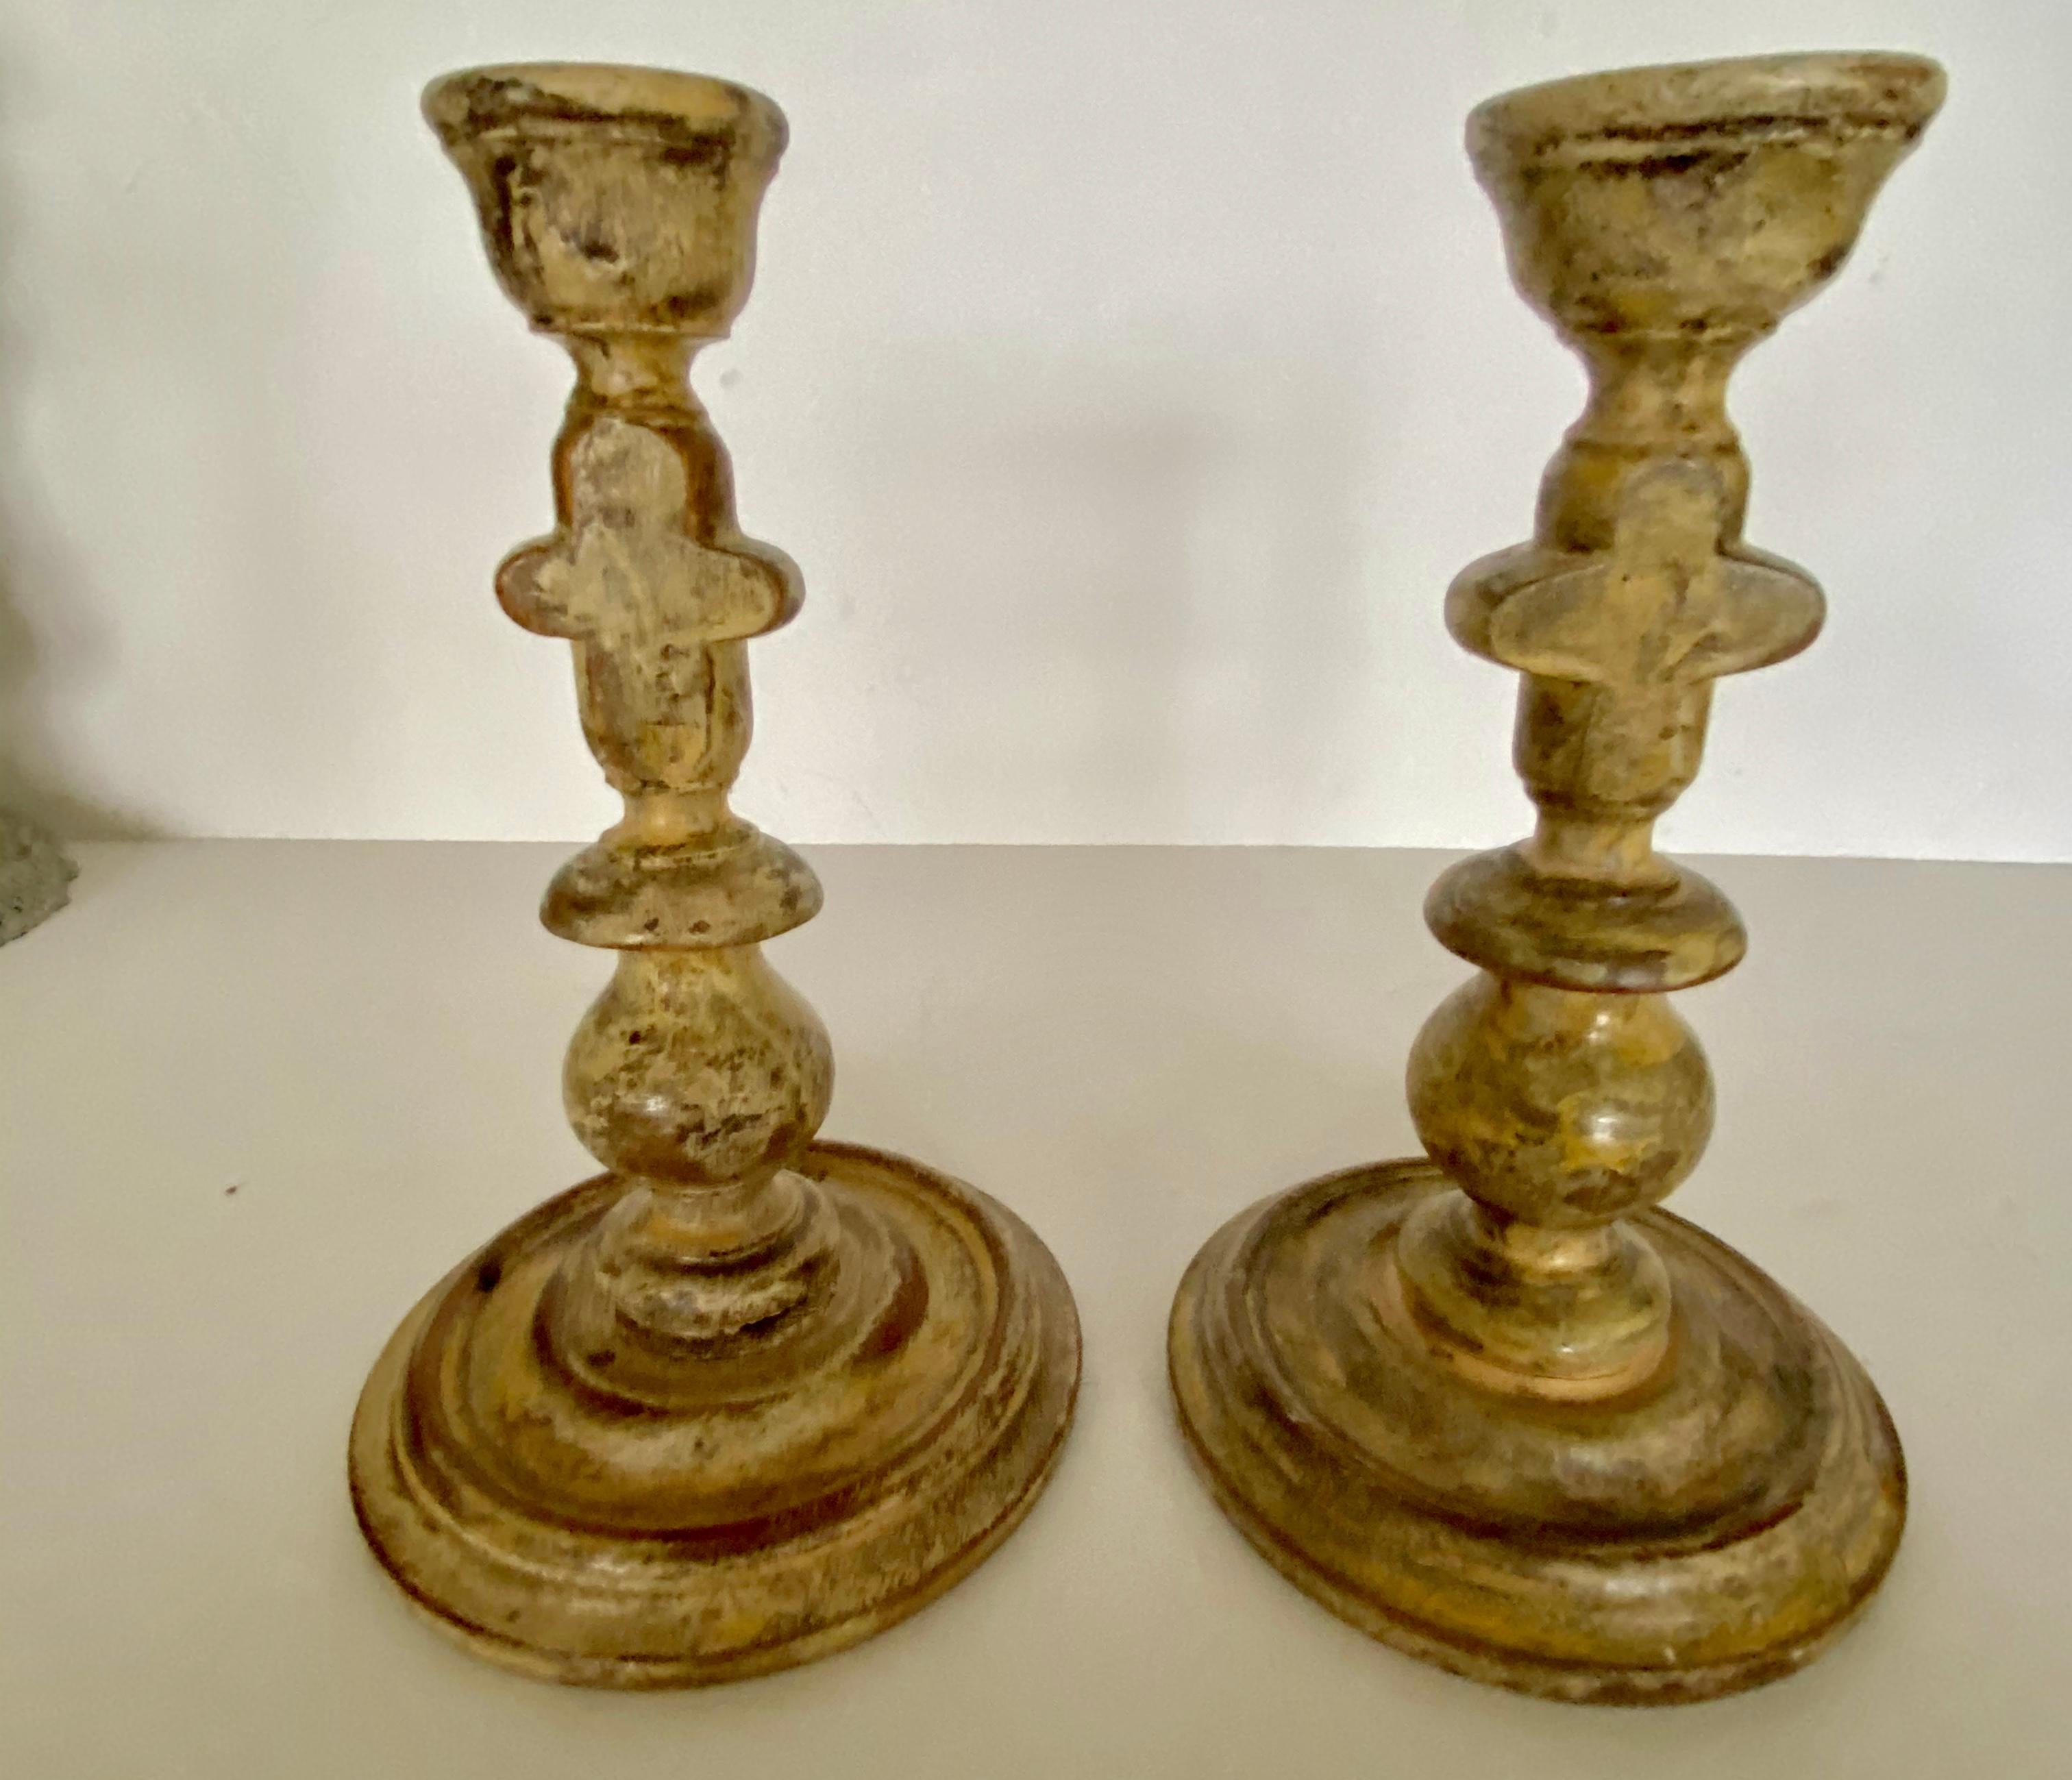 Hand-Crafted Pair of Carved Wood Candle Sticks